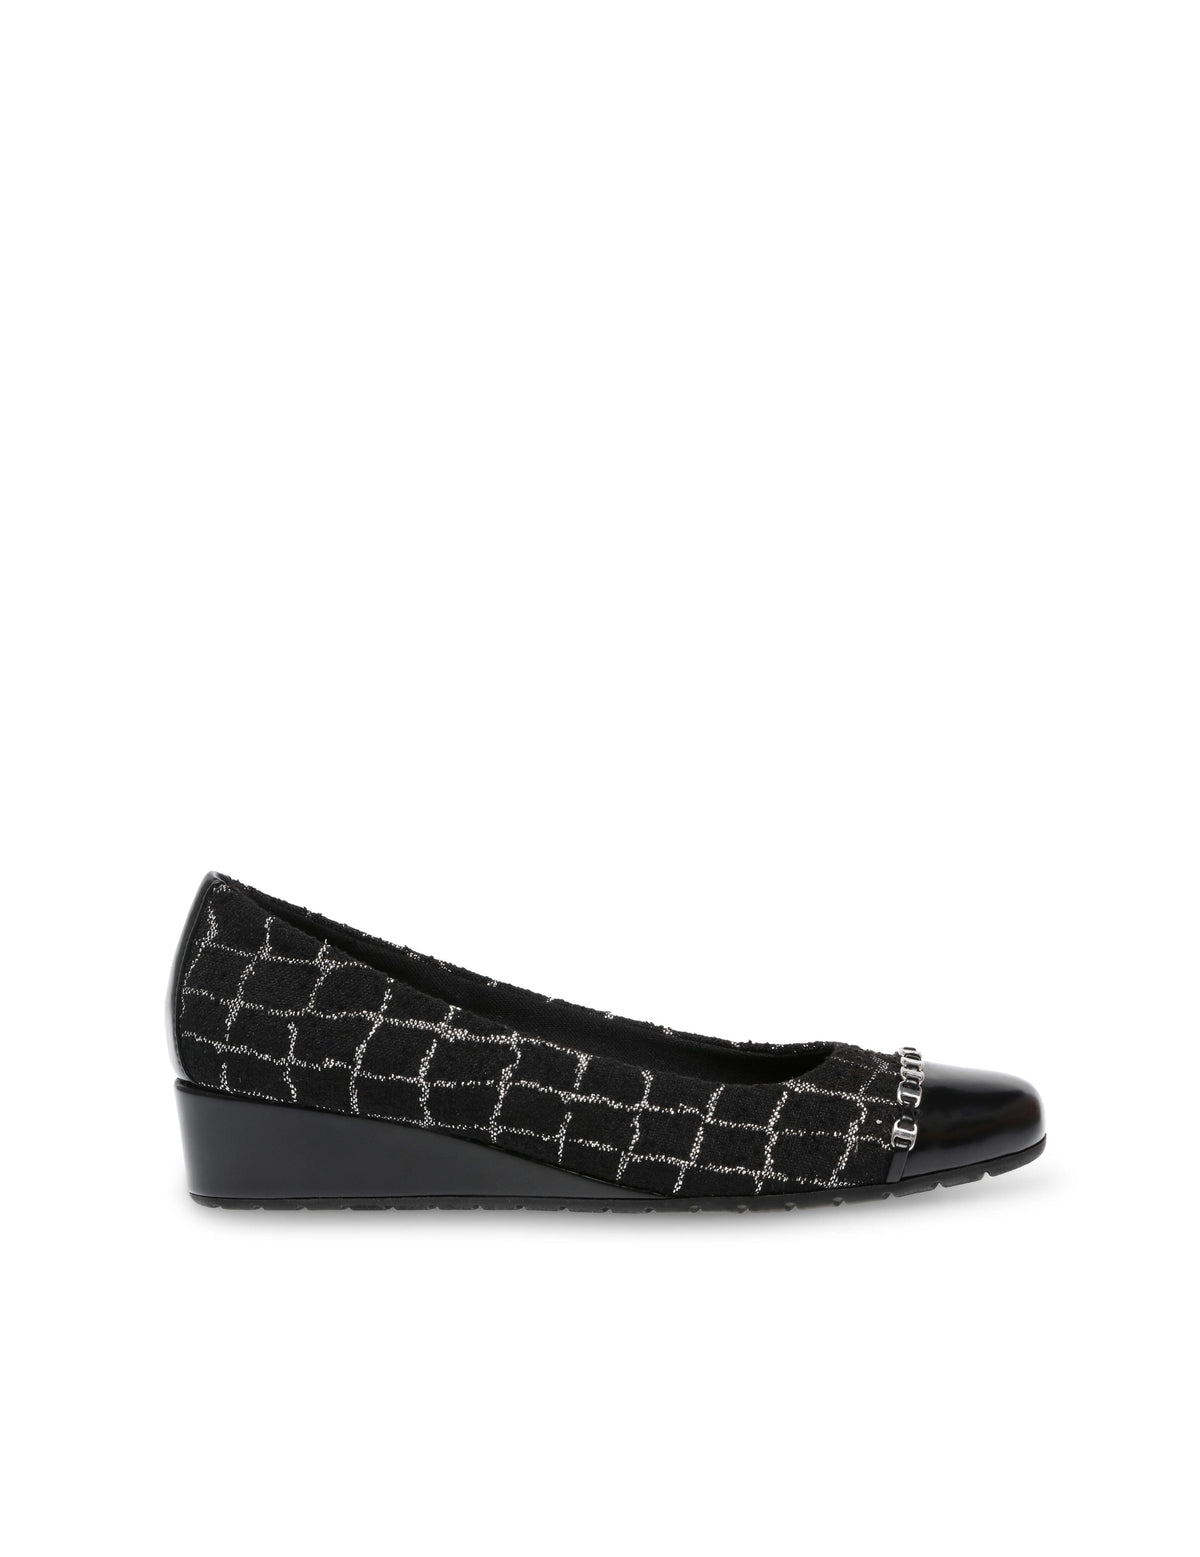 Moxy Suede Checkered Wedge